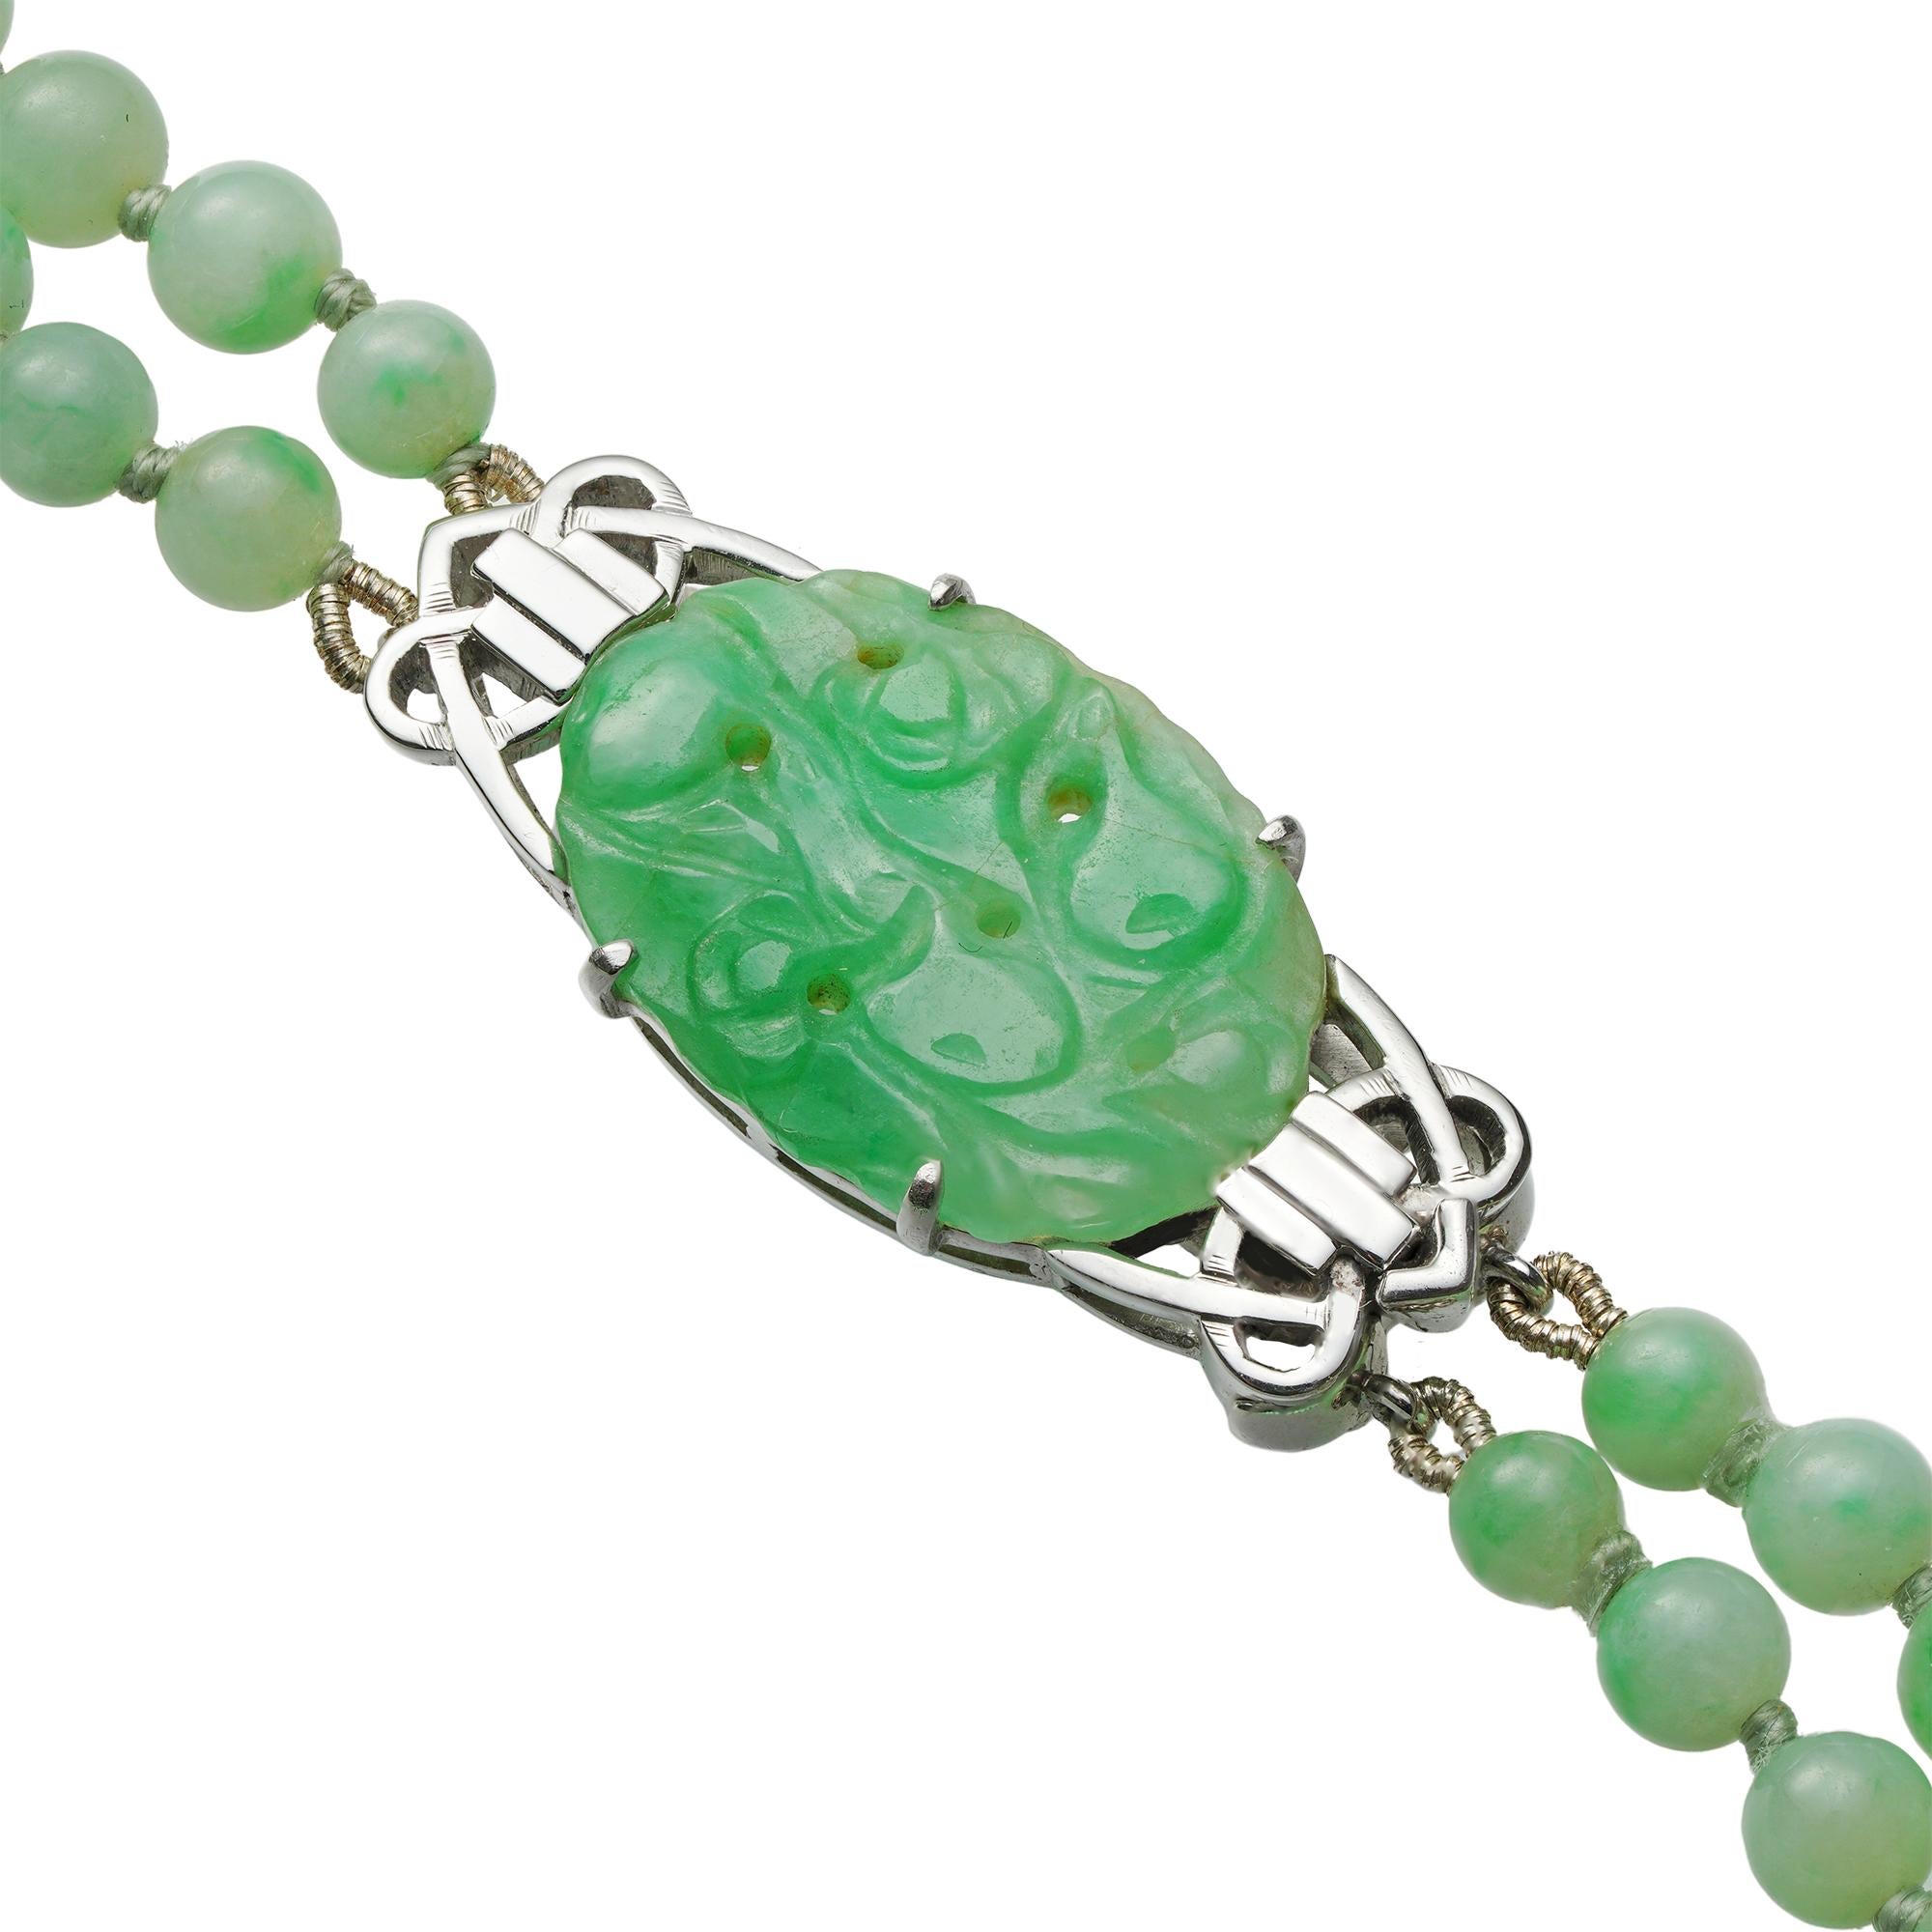 A double-row jade necklace, the one hundred and forty-four beads strung to two rows graduating from the center, their diameter ranging from 4.0mm to 10.0mm, all to a white metal box clasp set with a carved oval-shaped jade plate, circa 1920, the